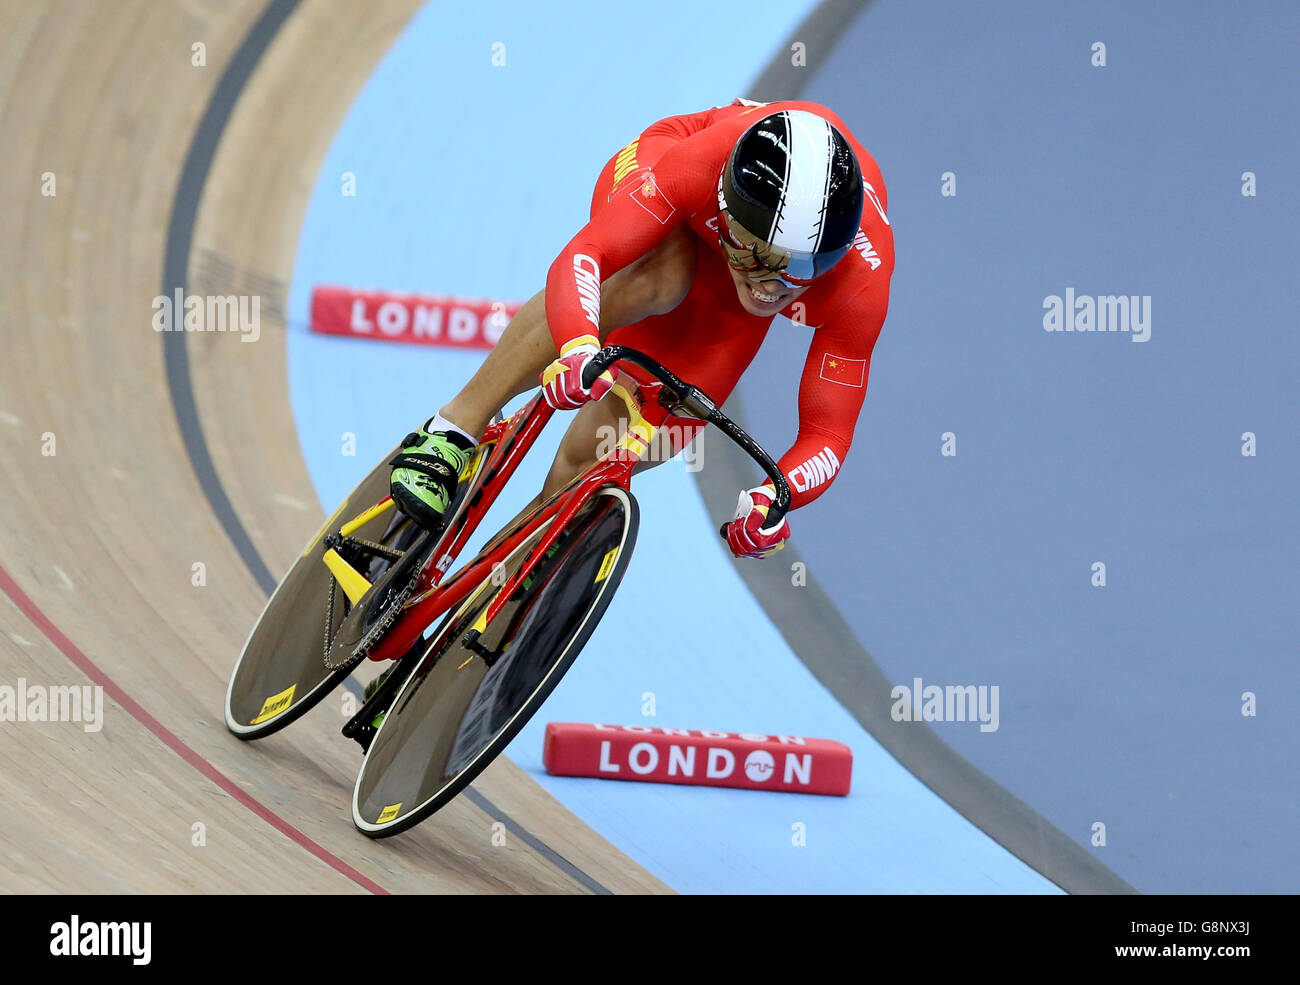 China's Chao Xu competes in the Men's Sprint during day three of the UCI Track Cycling World Championships at Lee Valley VeloPark, London. PRESS ASSOCIATION Photo. Picture date: Friday March 4, 2016. See PA story CYCLING World. Photo credit should read: Tim Goode/PA Wire. RESTRICTIONS: , No commercial use without prior permission, please contact PA Images for further information: Tel: +44 (0) 115 8447447. Stock Photo